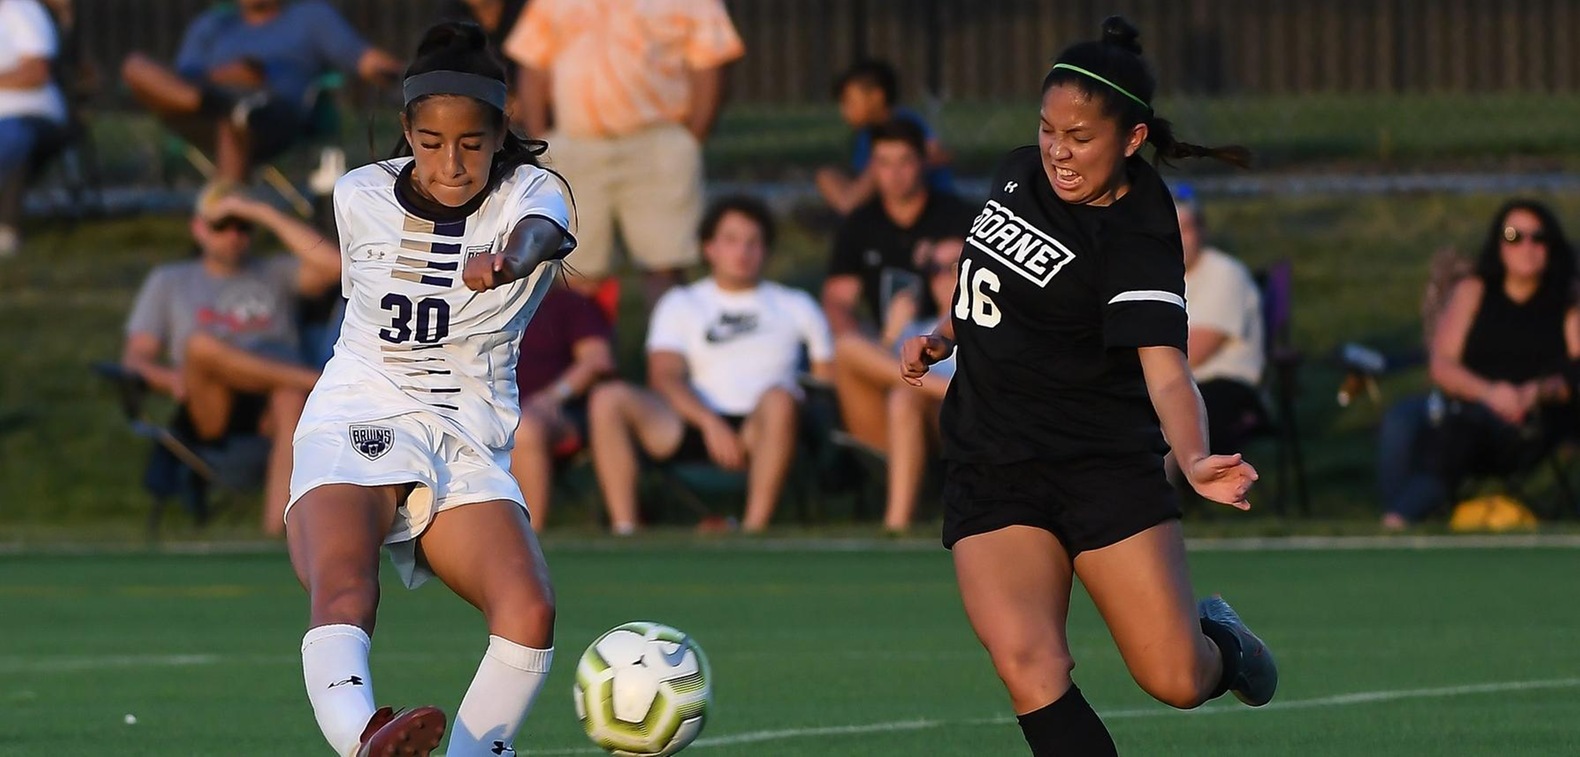 Sinai Bernal scored a goal and assisted on two others to lead BU past CSM on Saturday.